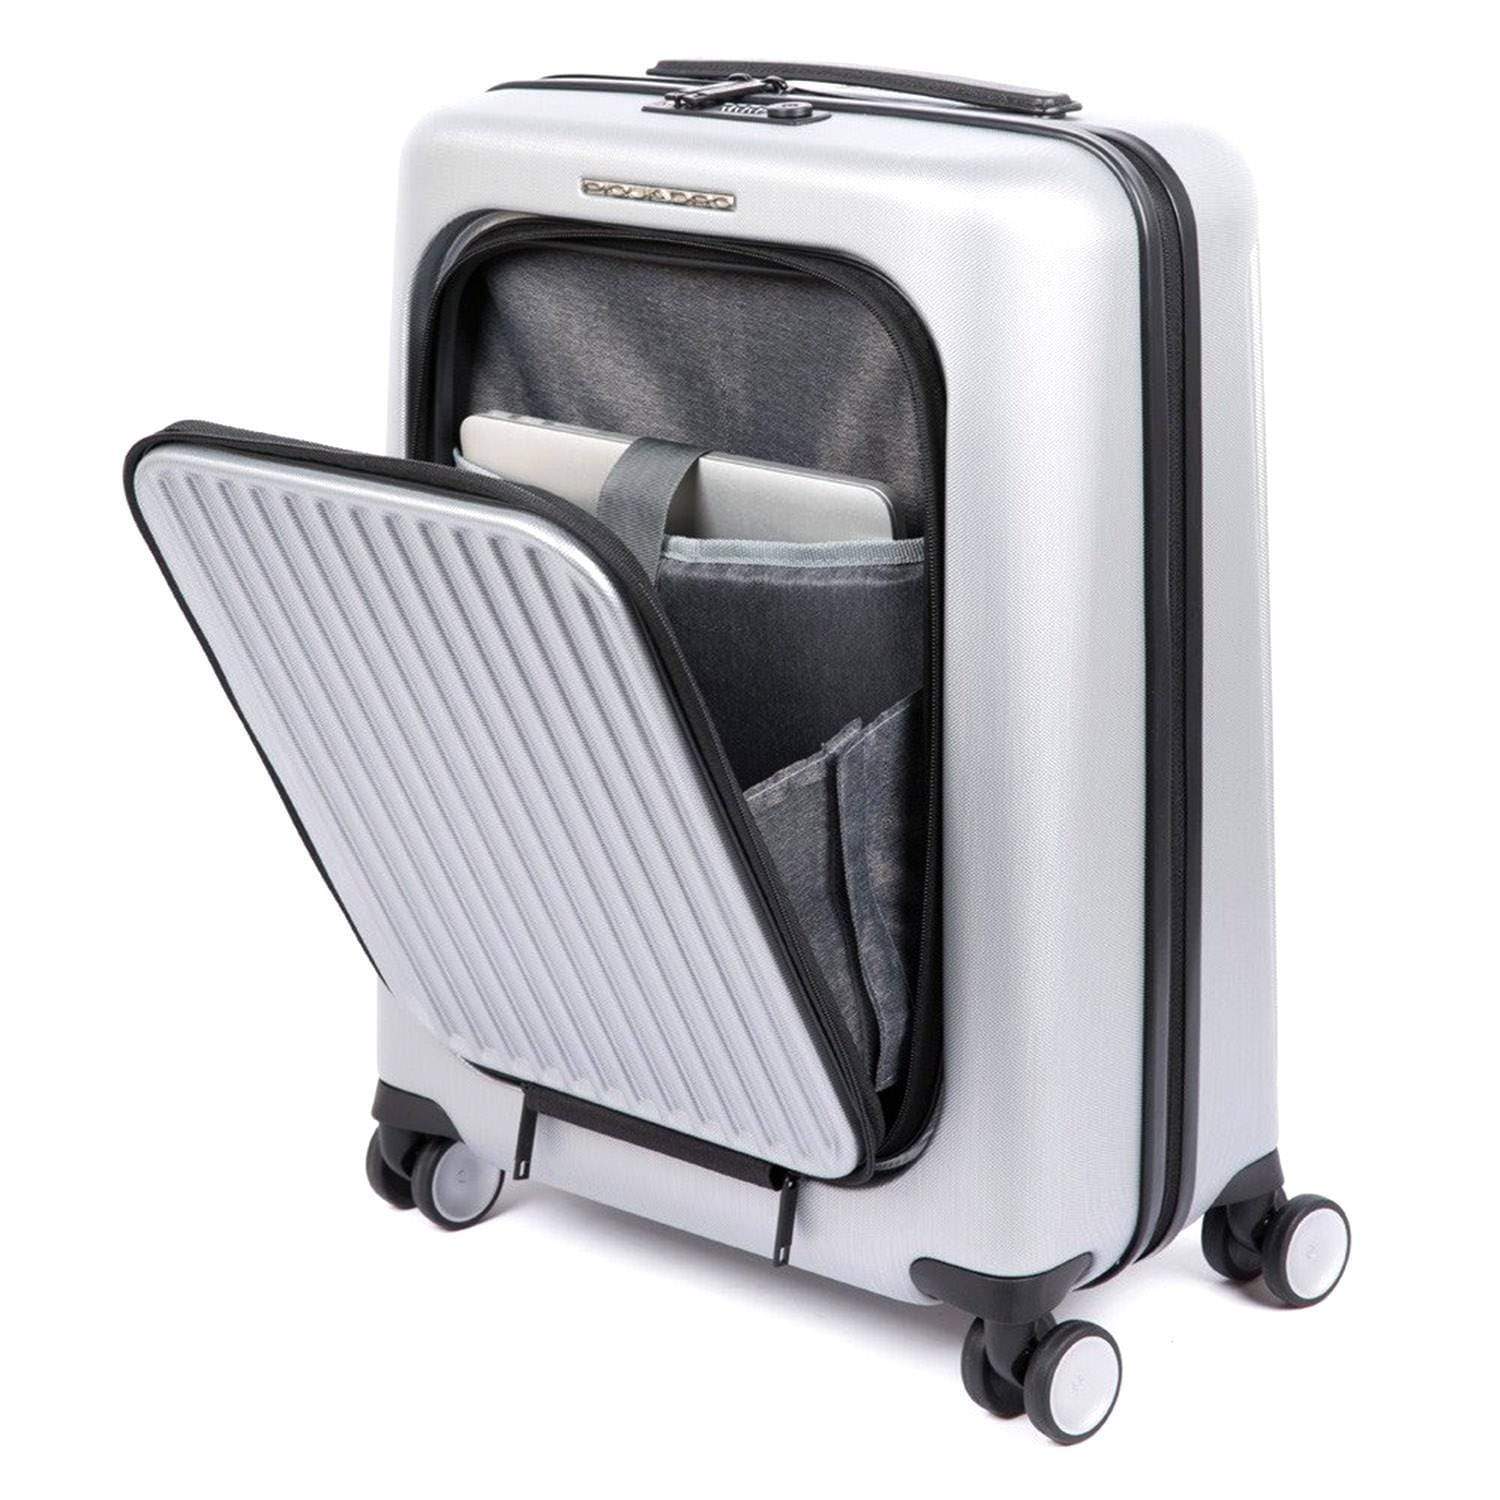 Piquadro Relyght Plus Hard Side Spinner Trolley Bag - Grey - BV4426PC2PZ/GRN - Jashanmal Home